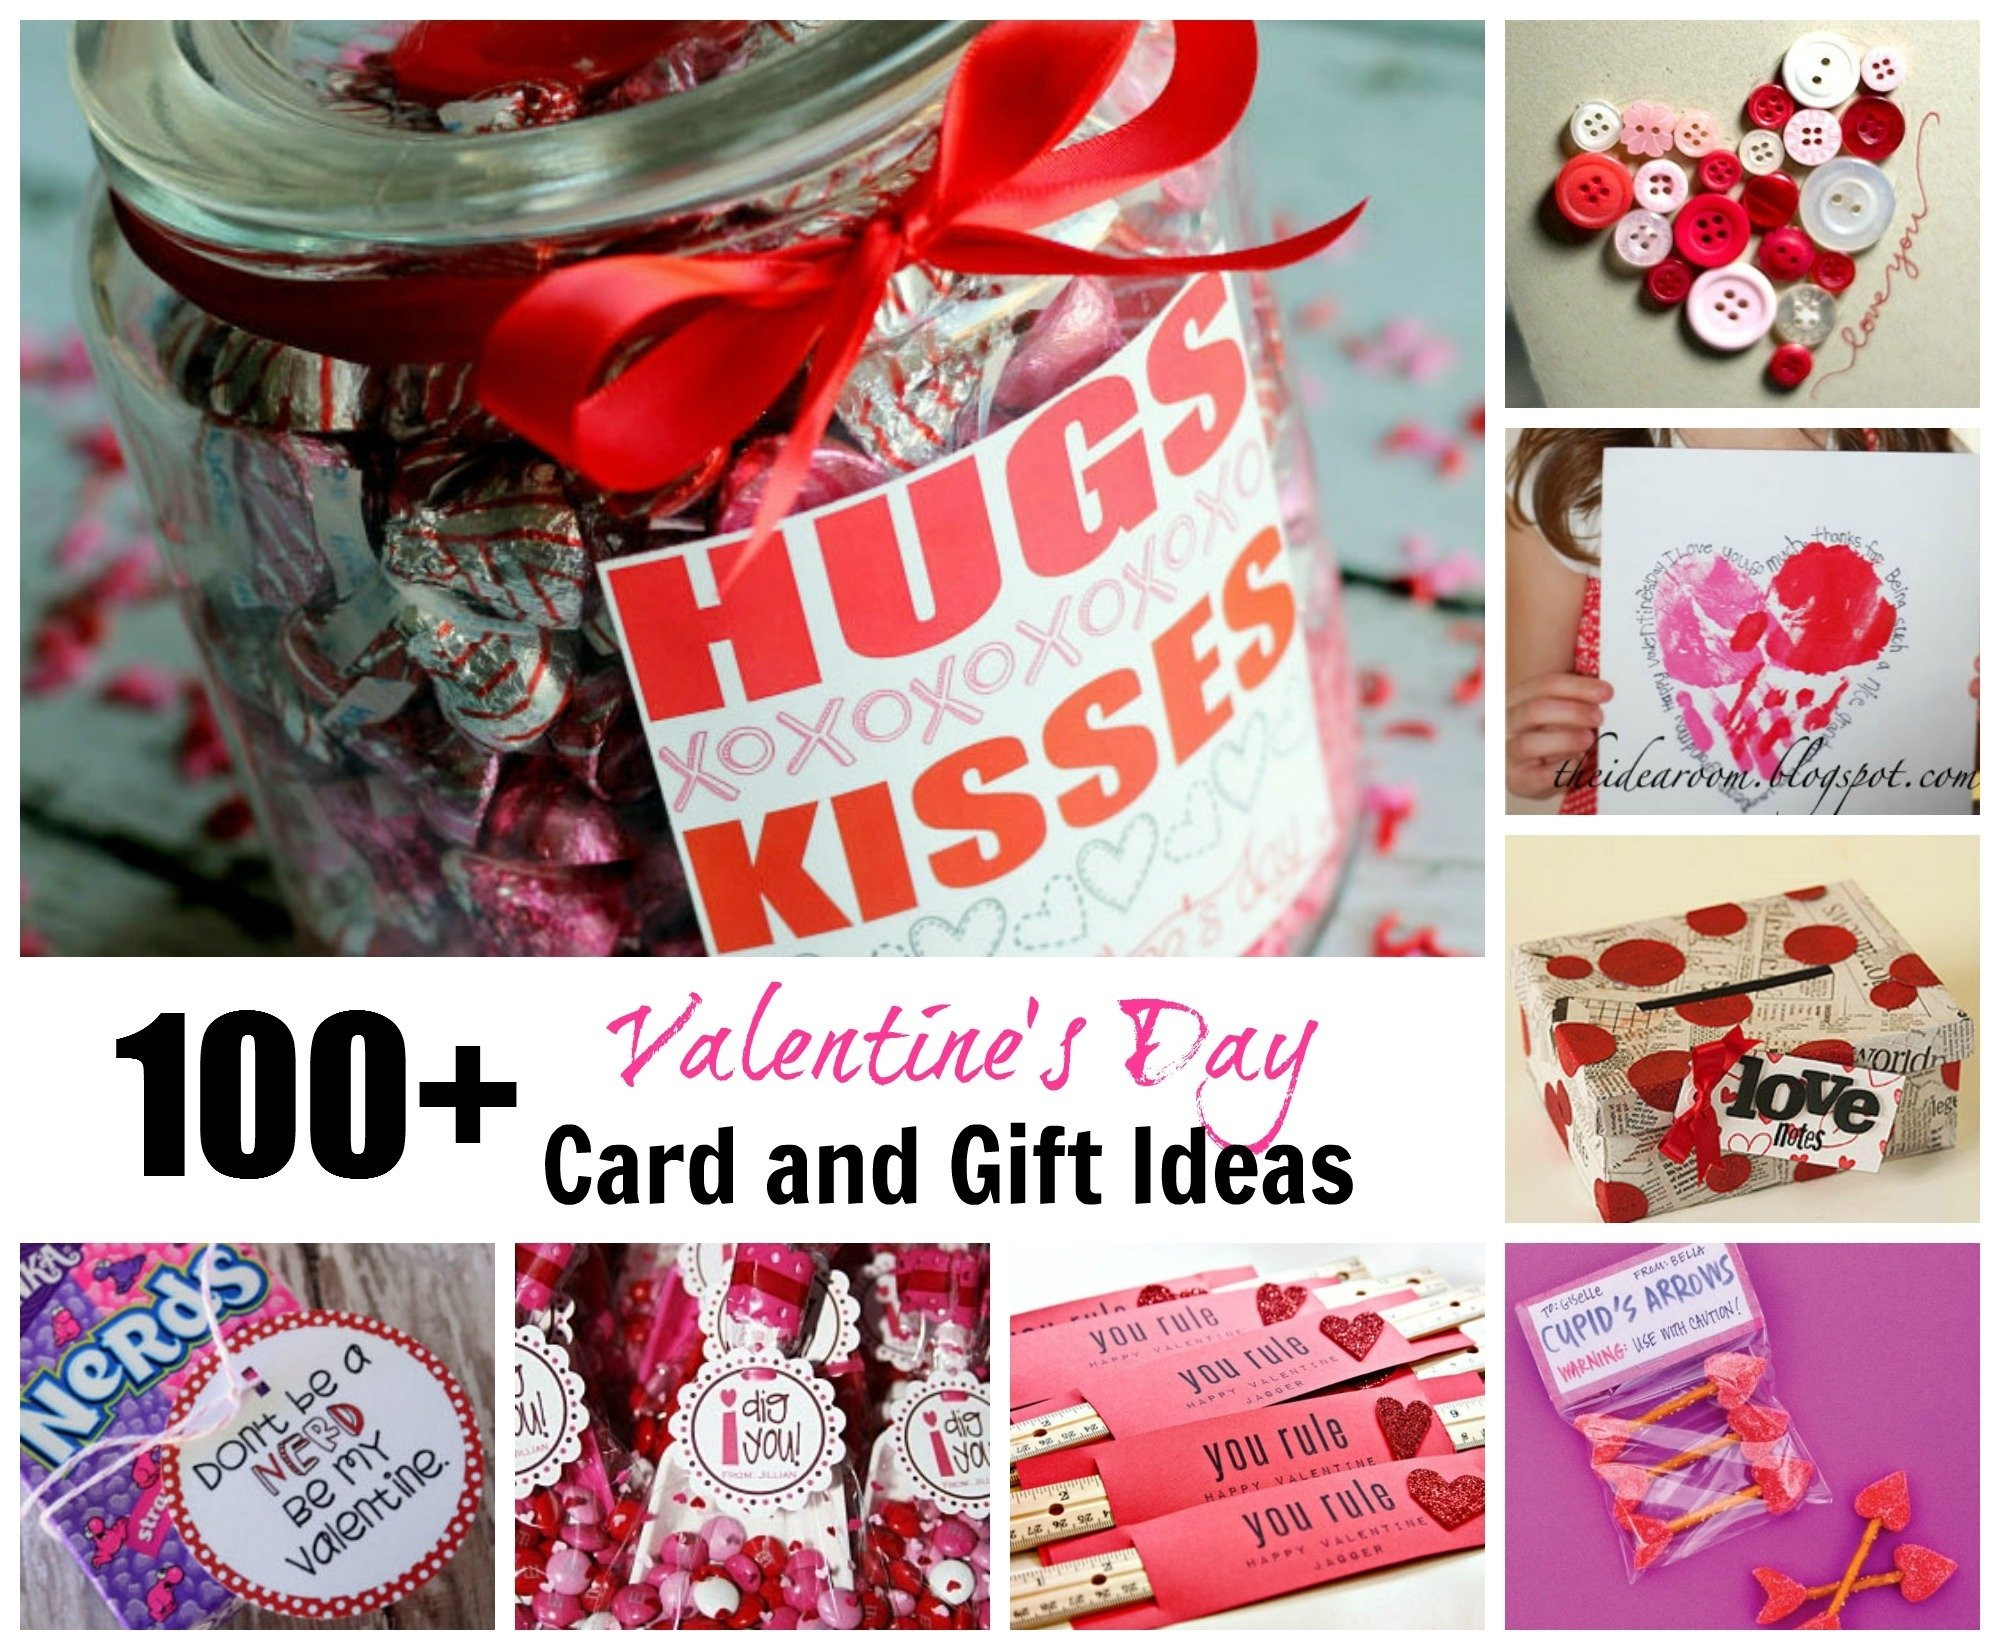 Homemade Valentines Day Ideas For Him
 10 Lovable Homemade Valentines Ideas For Him 2020